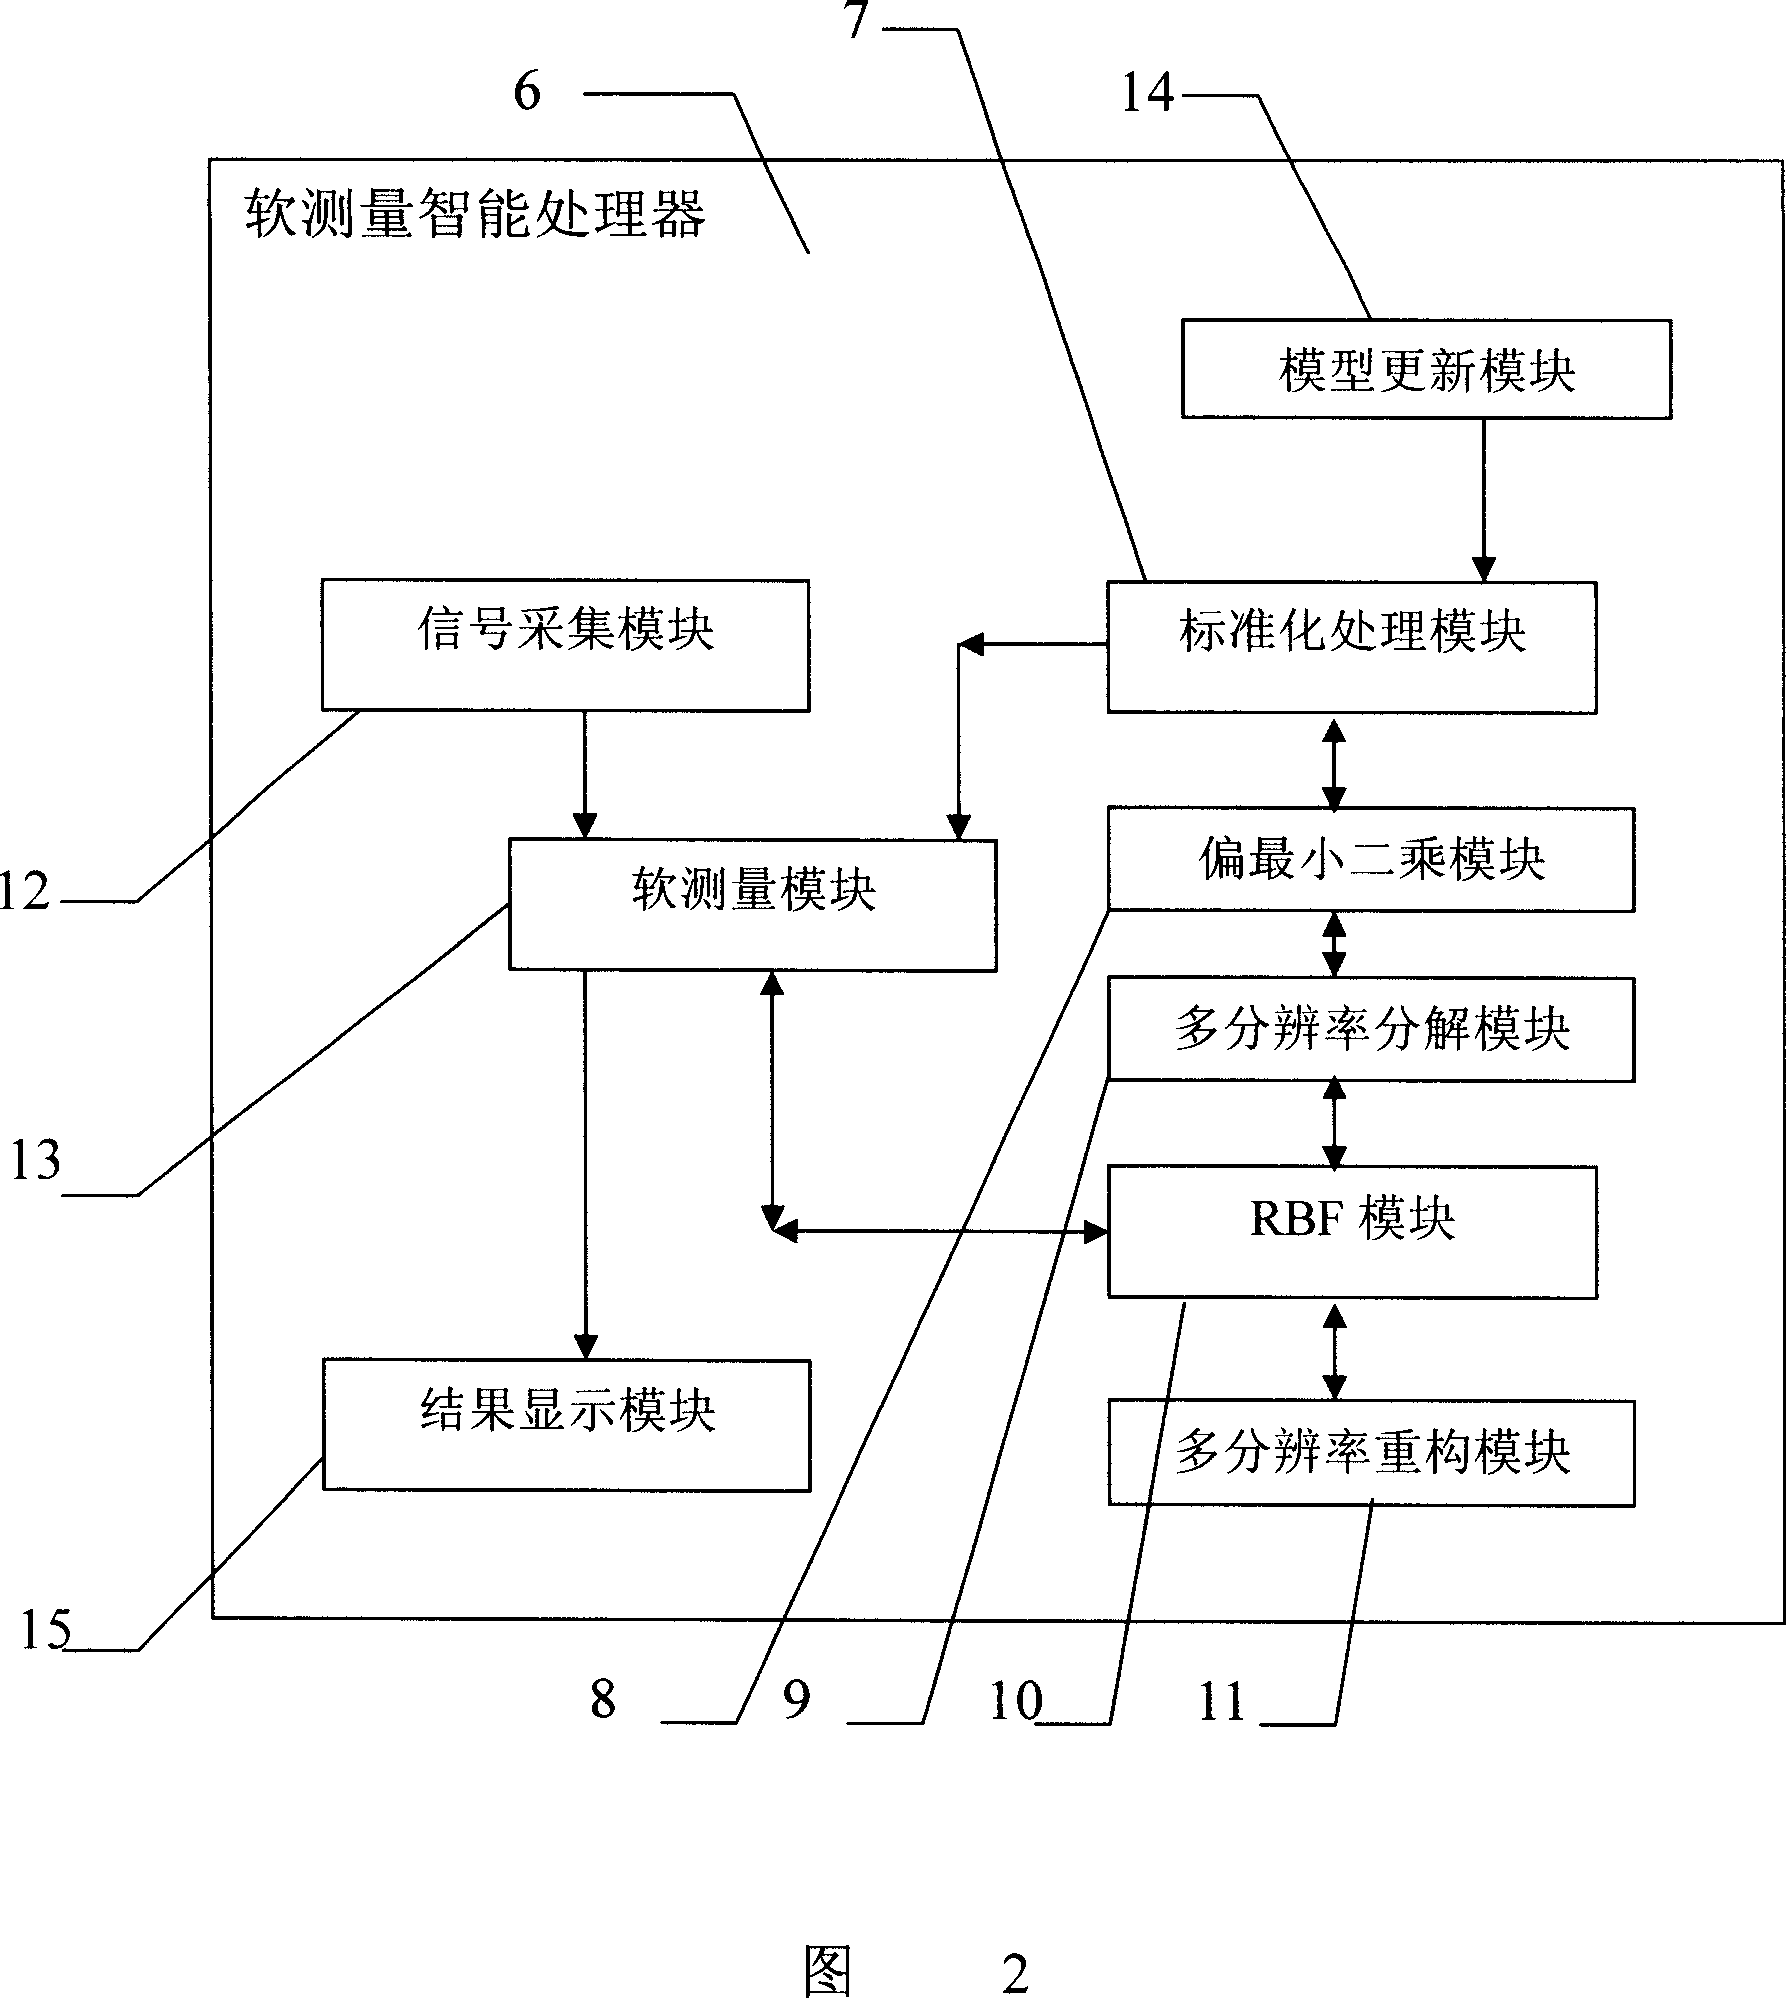 Industrial process multiresolution softsensoring instrument and method thereof